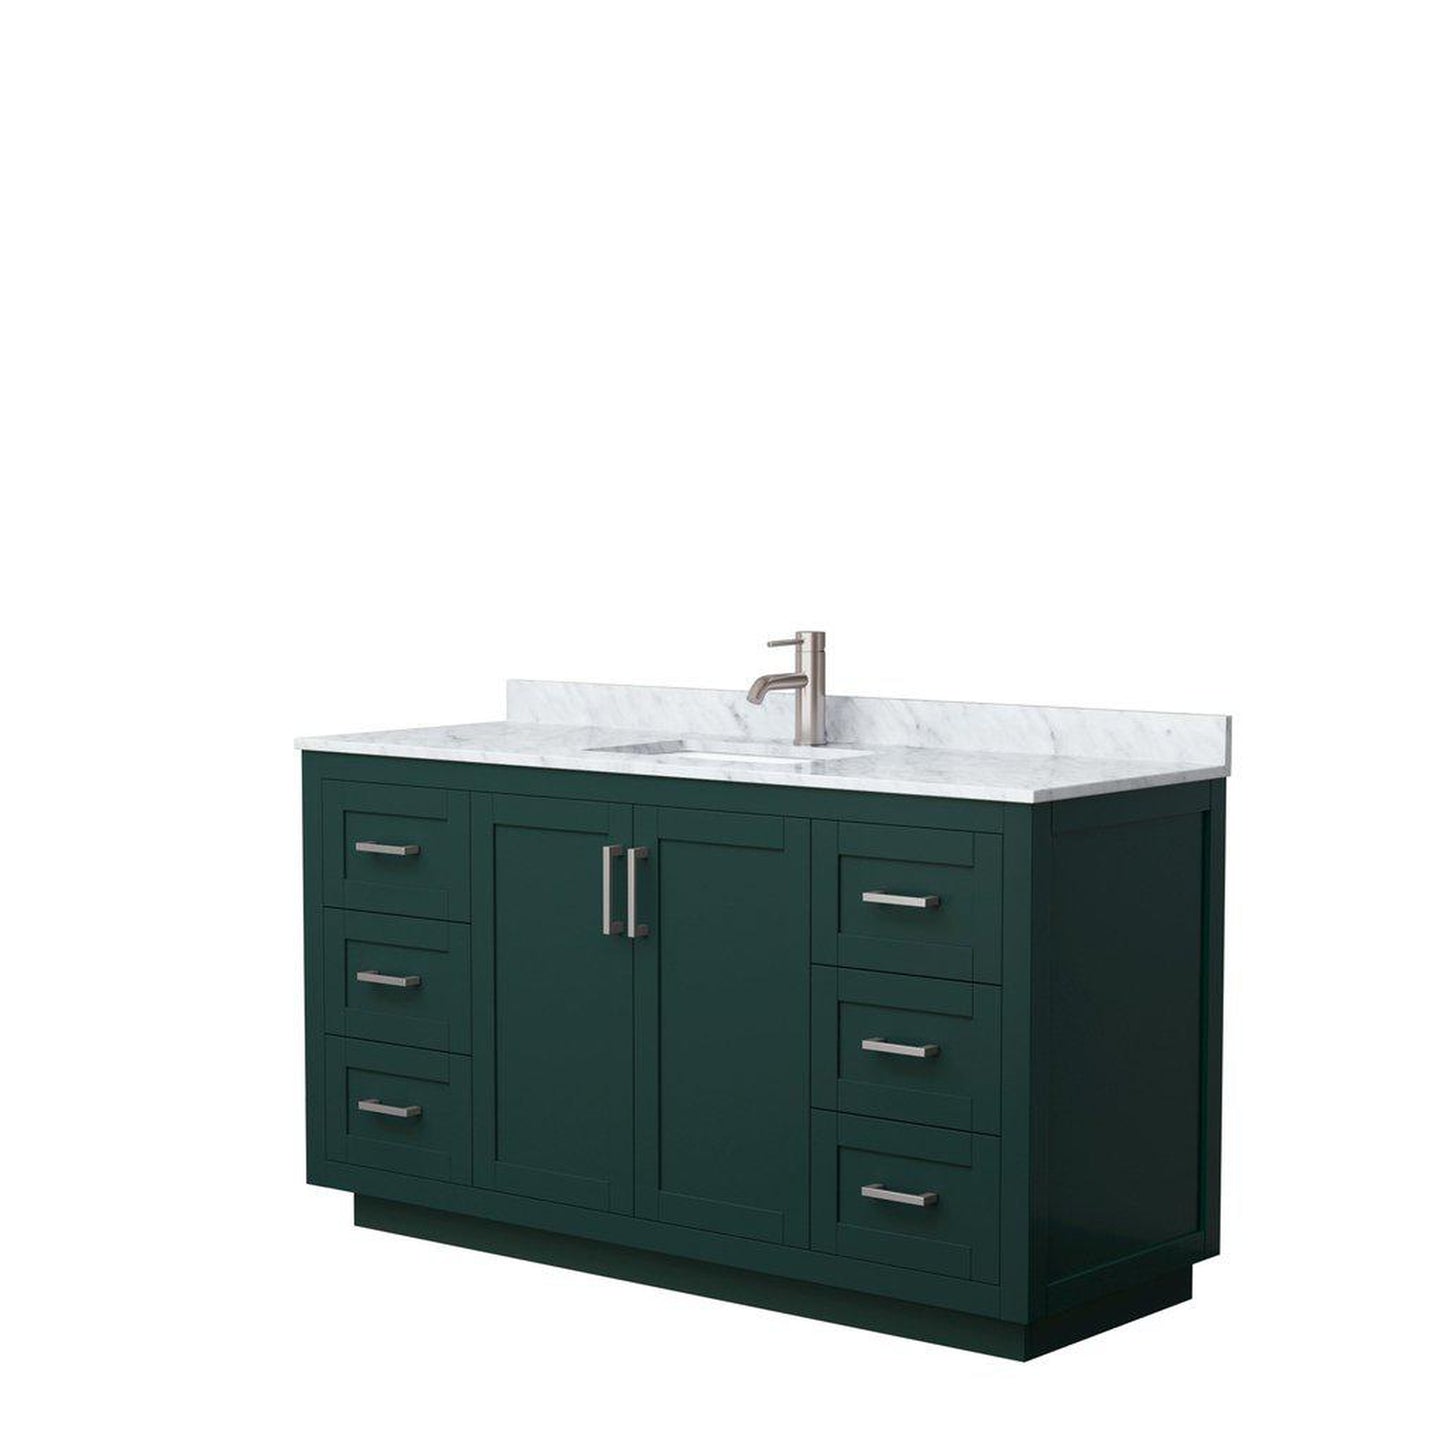 Wyndham Collection Miranda 60" Single Bathroom Green Vanity Set With White Carrara Marble Countertop, Undermount Square Sink, And Brushed Nickel Trim